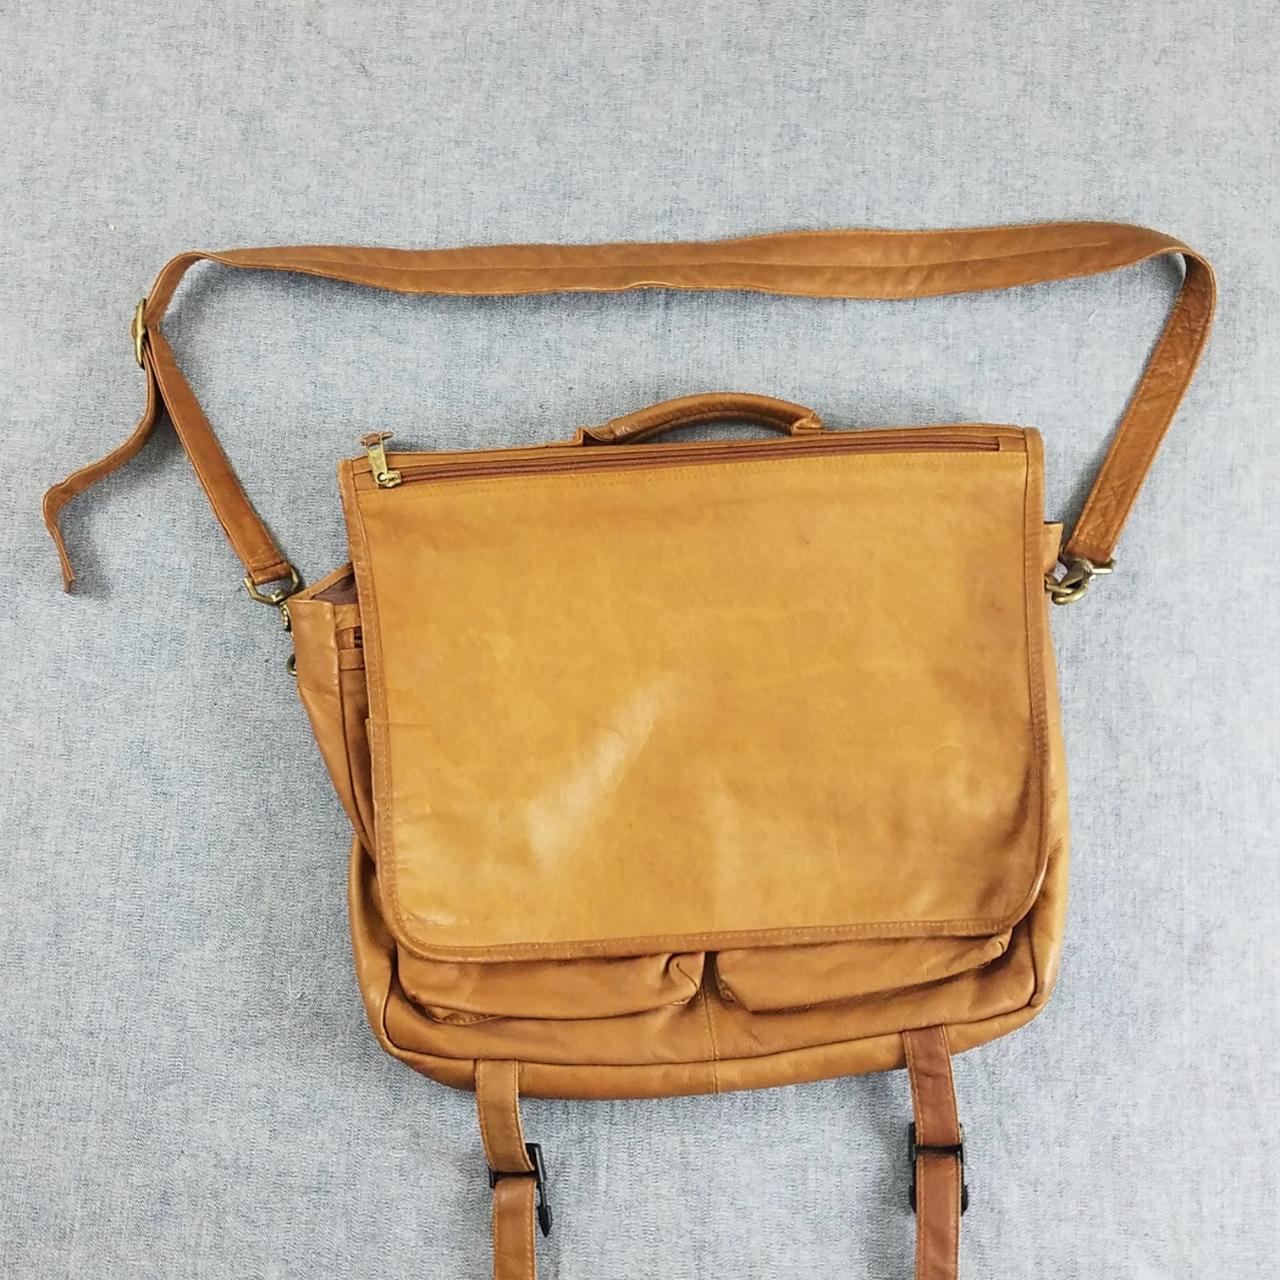 Leather messenger bag. Made buy SIMON, crafted in... - Depop